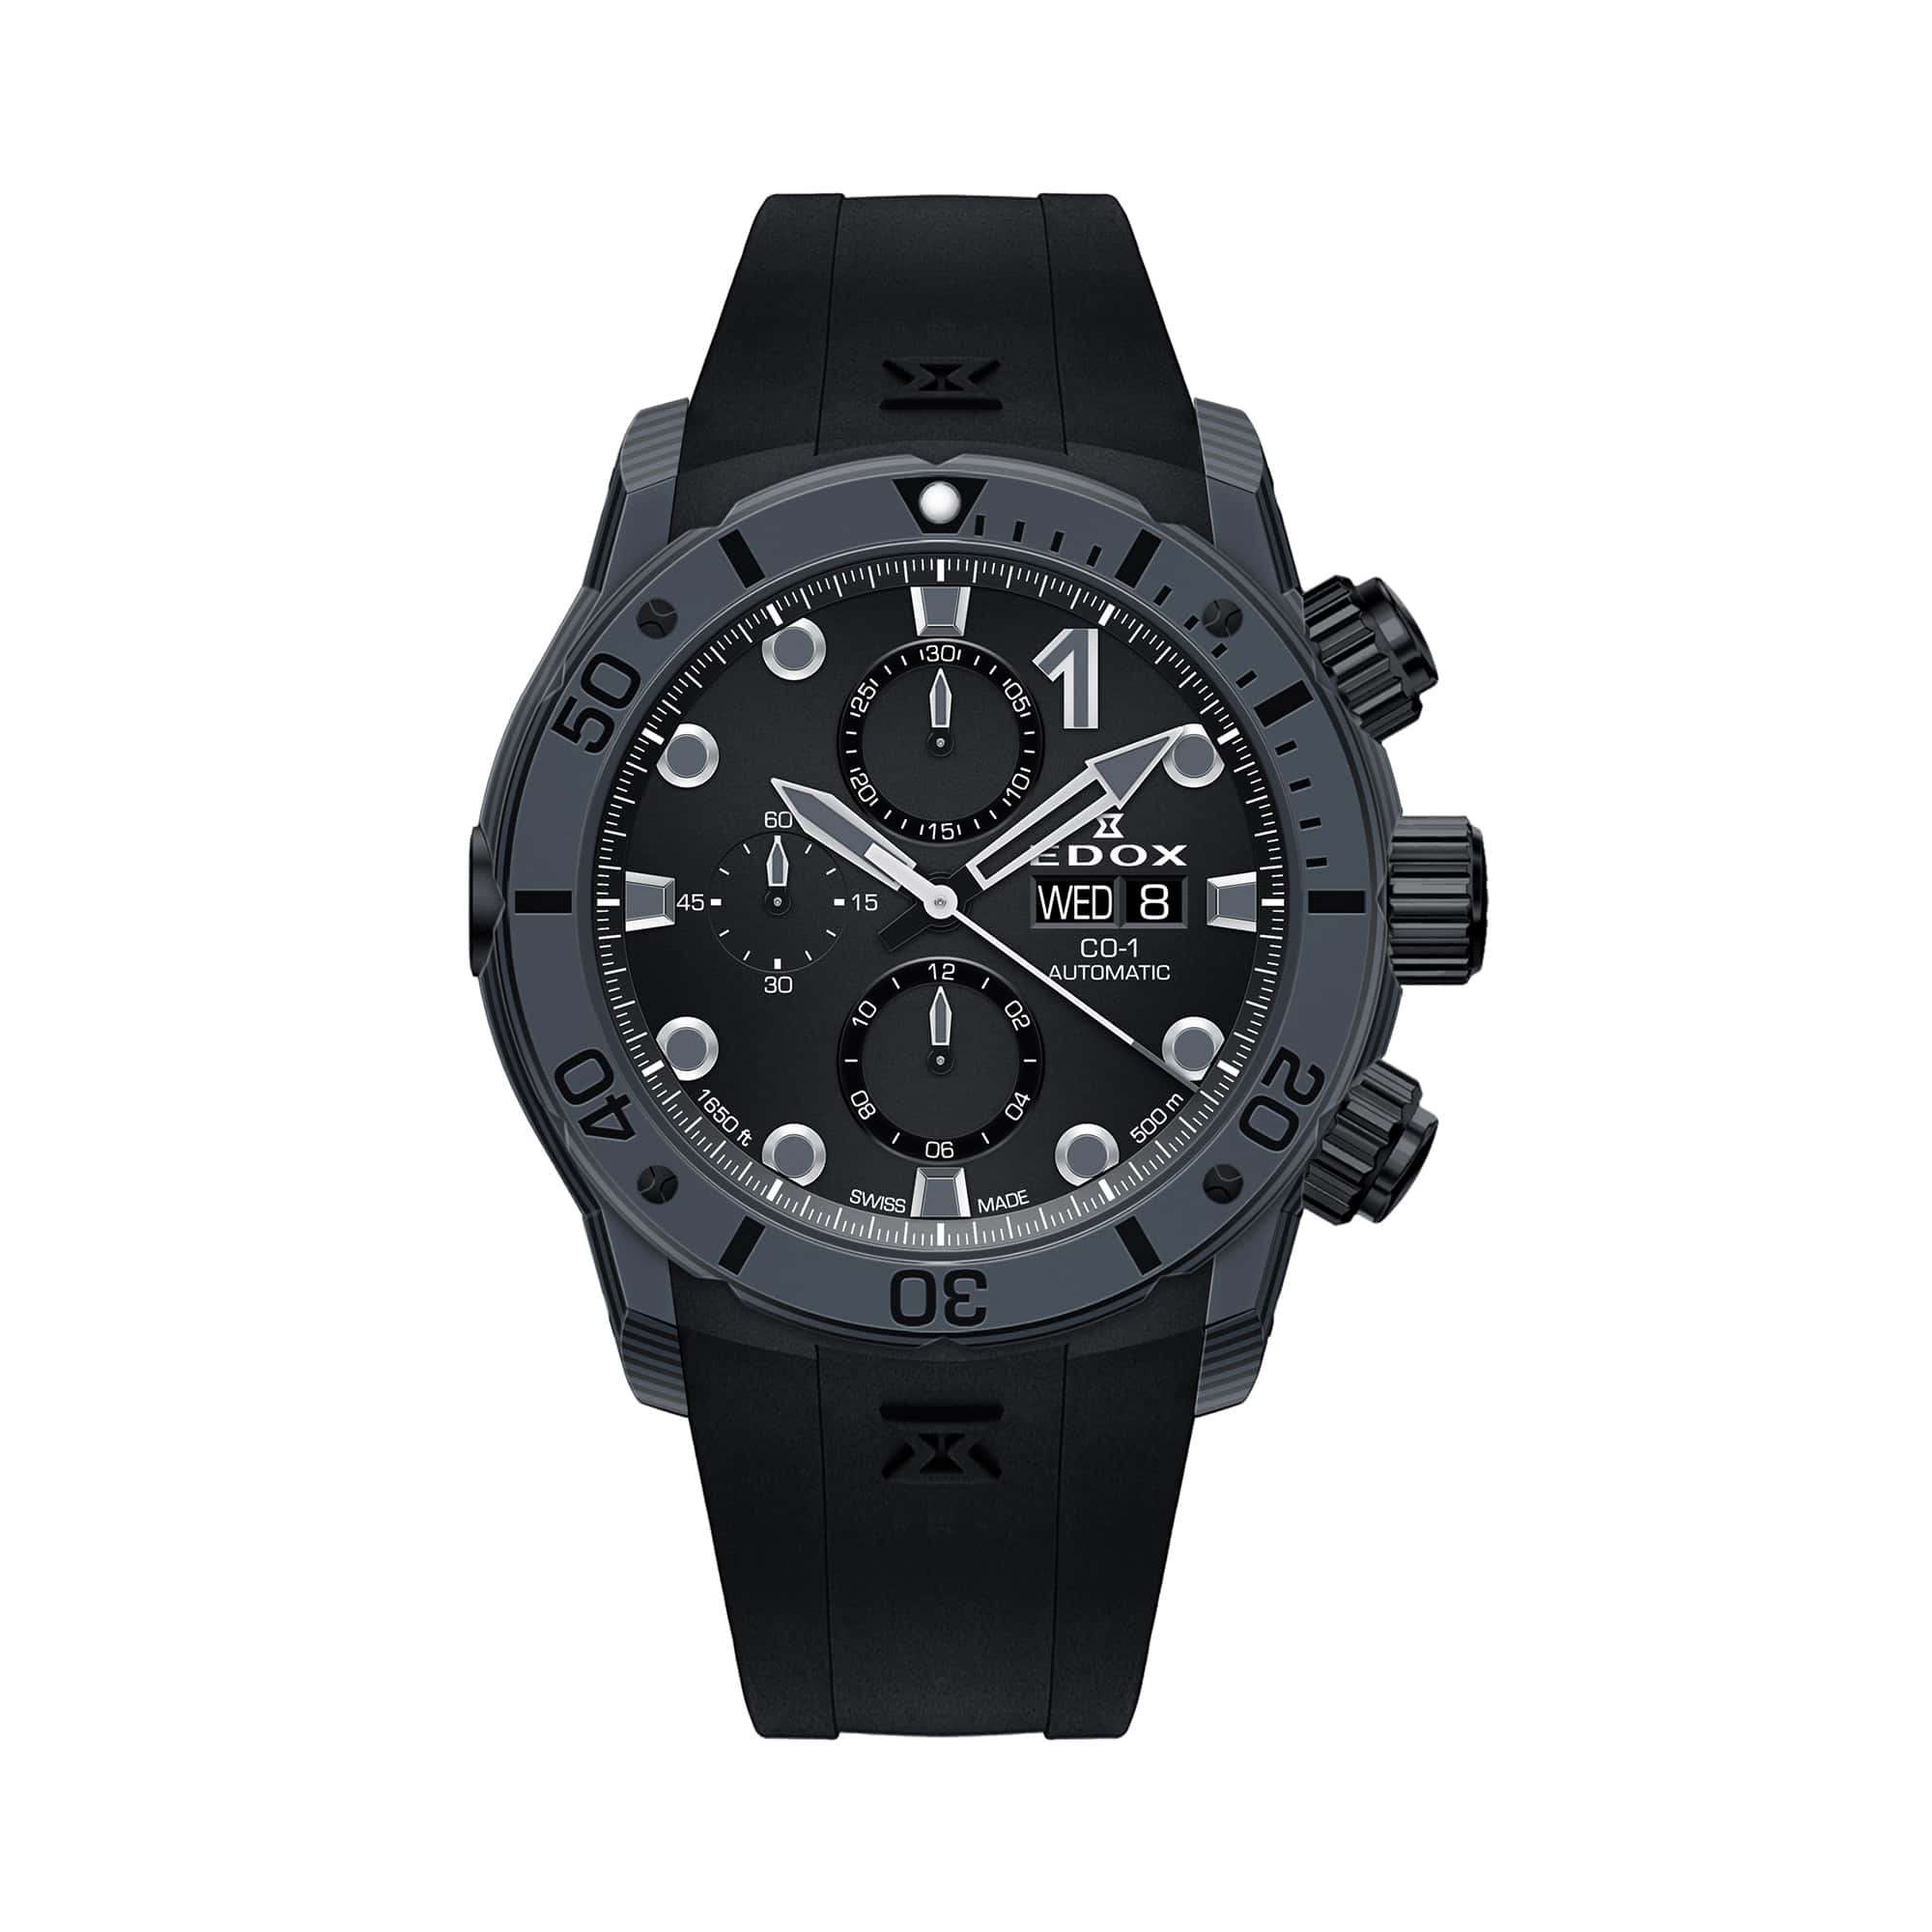 Edox CO-1 Carbon Chronograph Automatic 01125-CLNGN-NING – Swiss Time